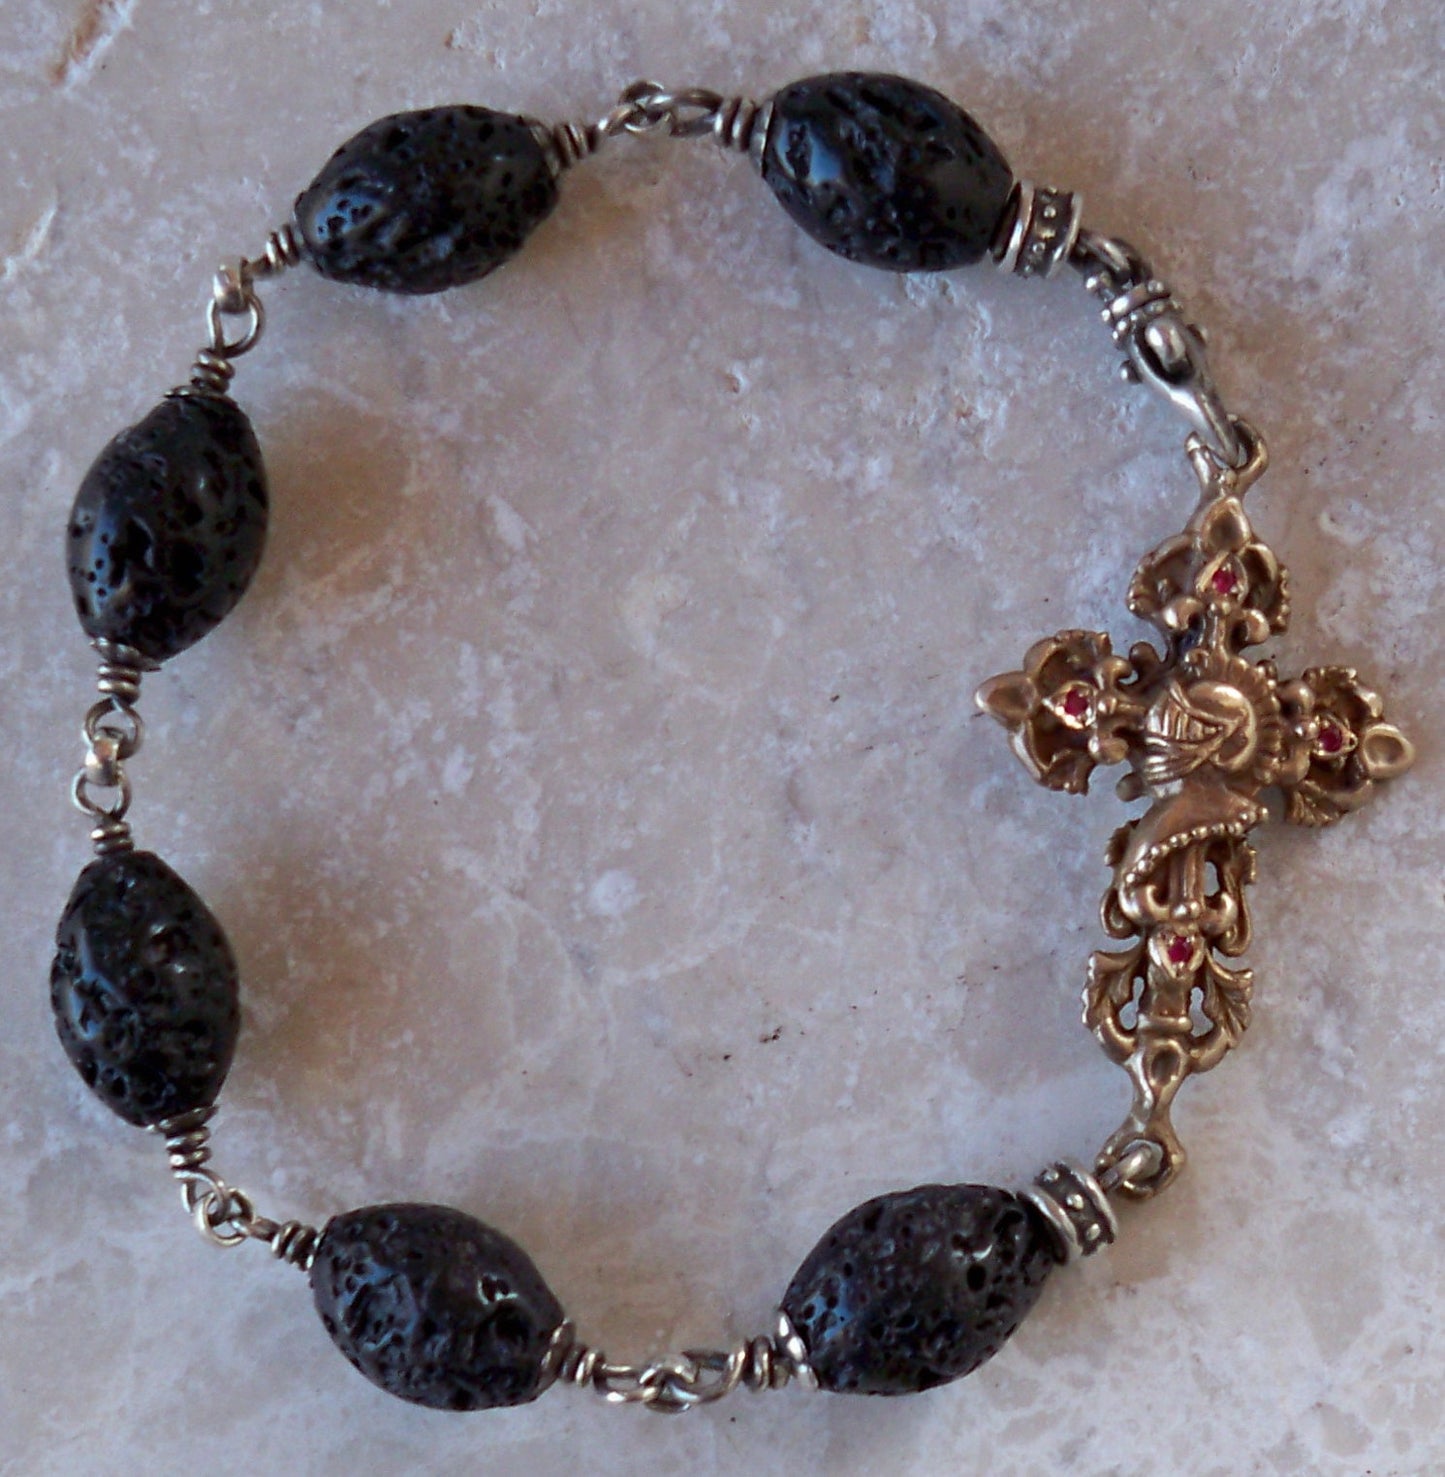 Bronze cross with rubies and black lava beads